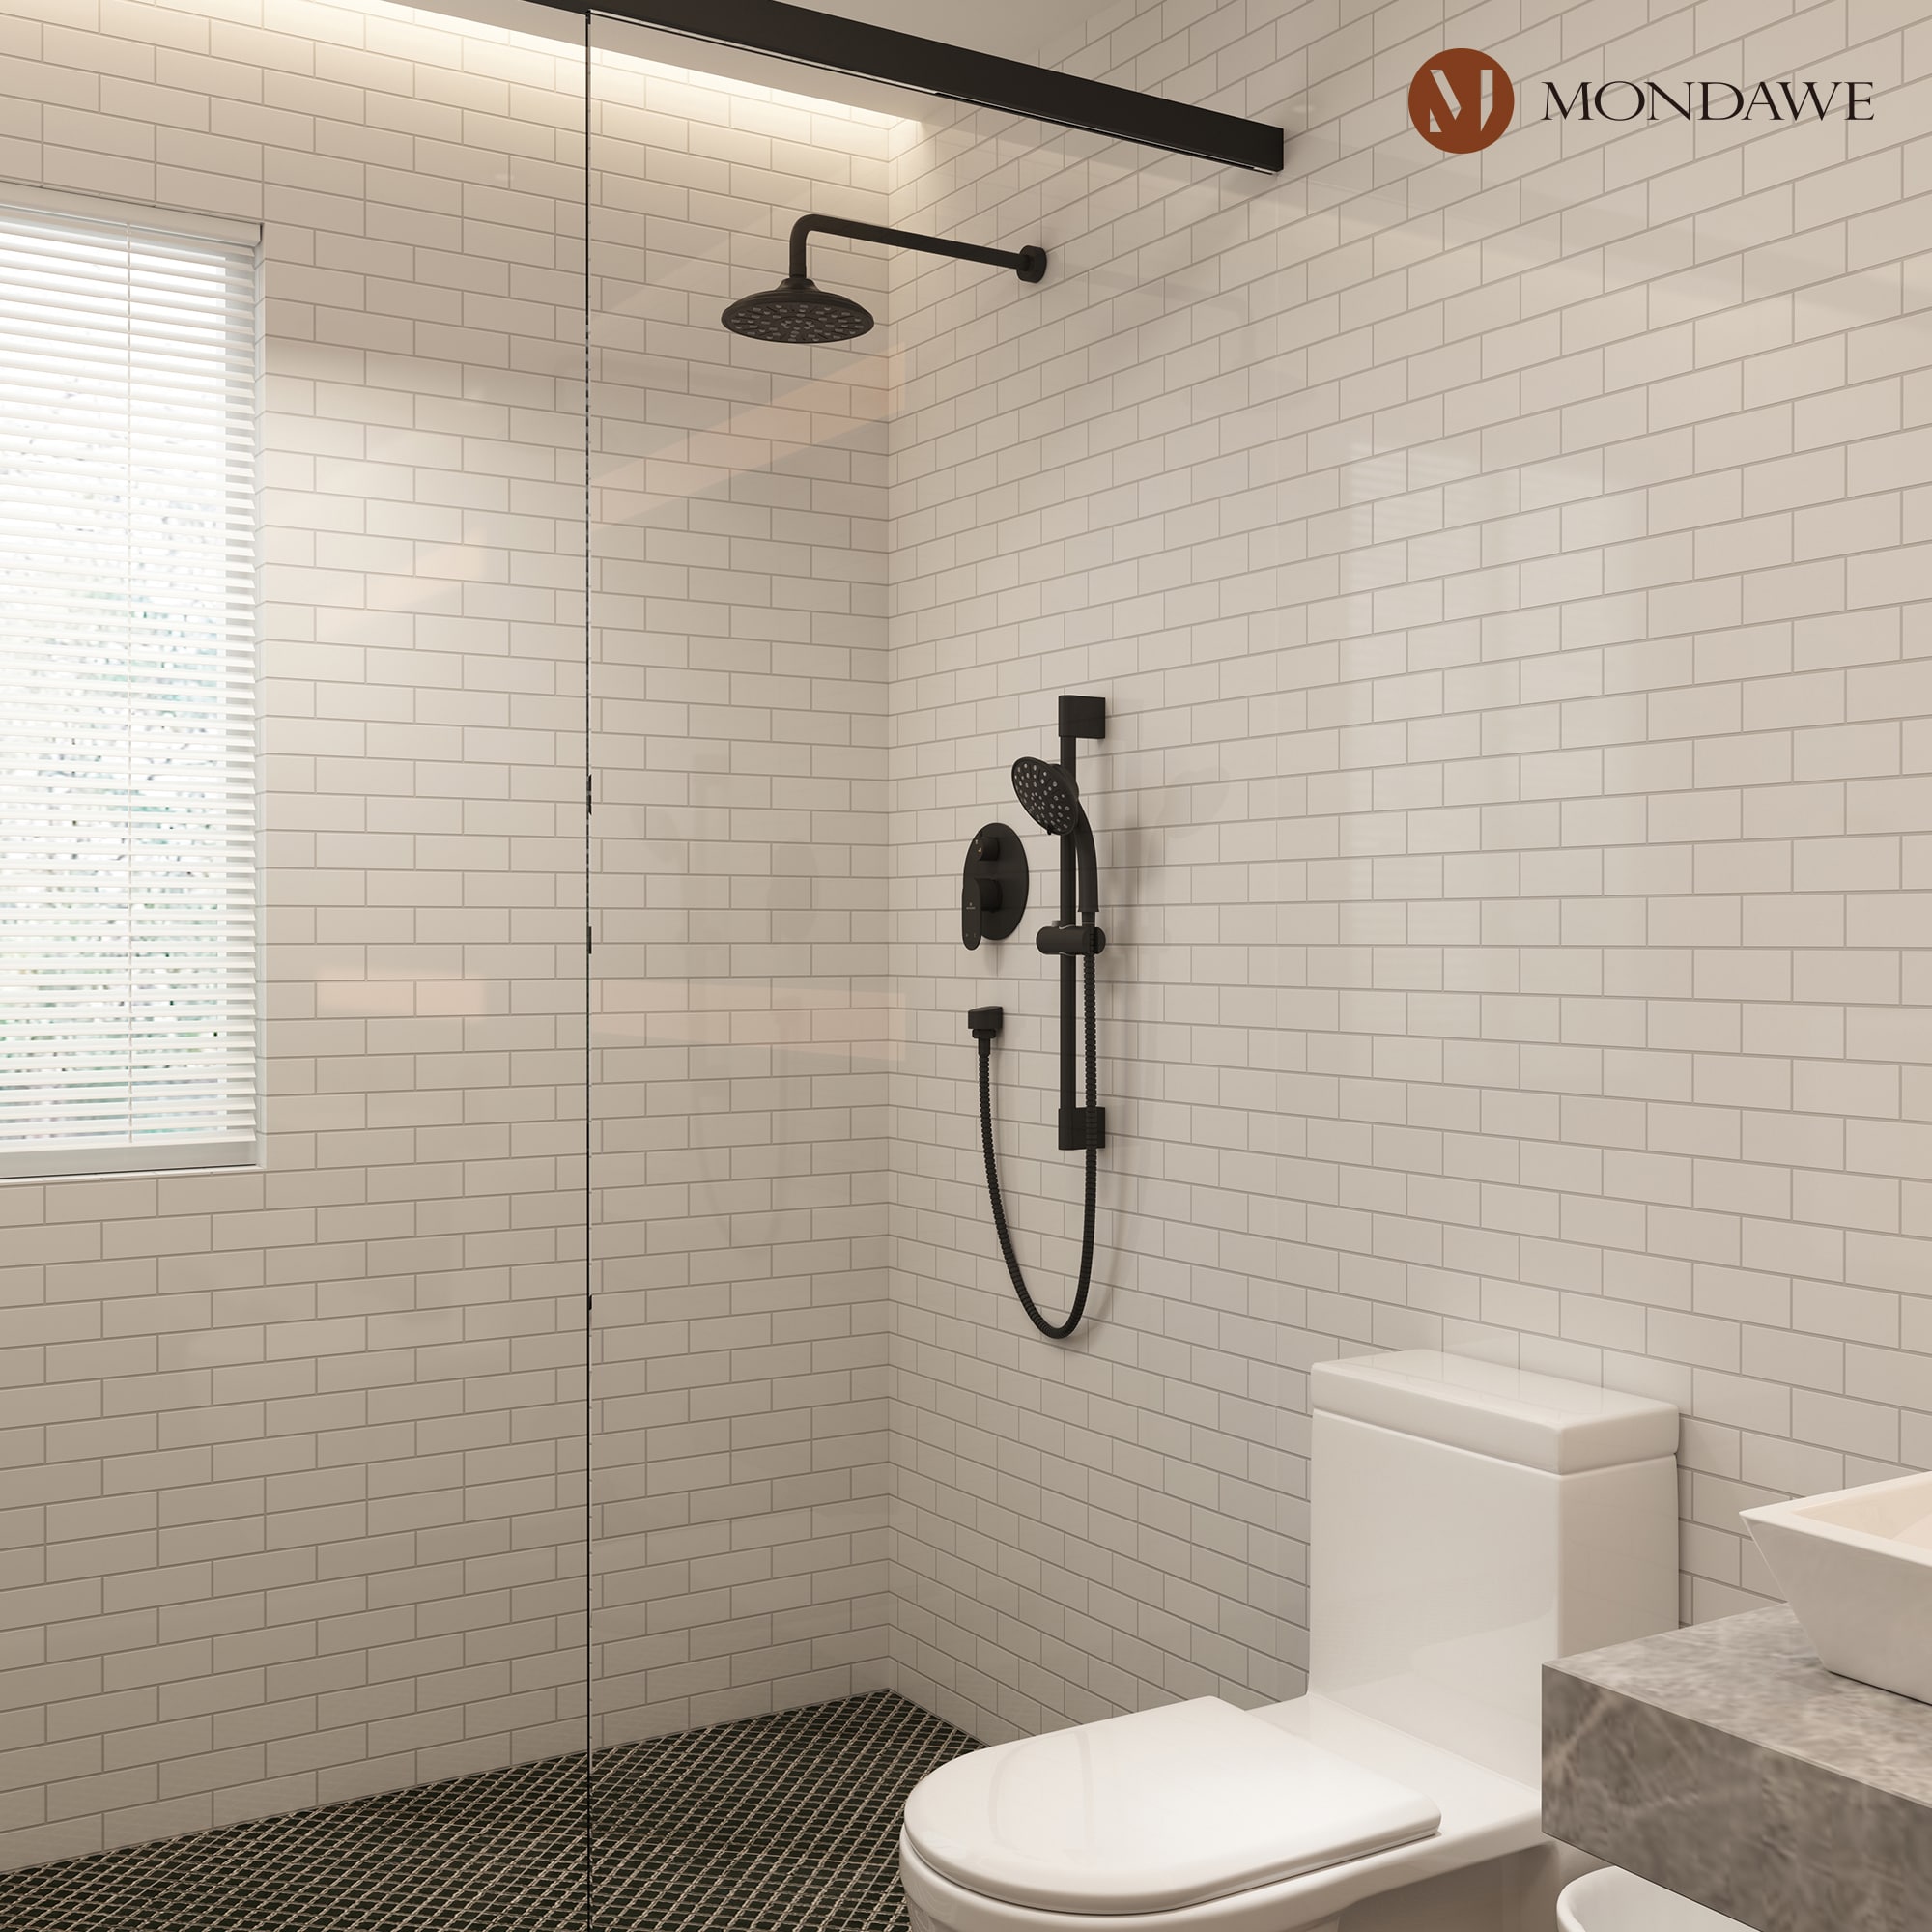 Mondawe Matte Black Built-In Shower Faucet System Valve Included in the Shower  Systems department at